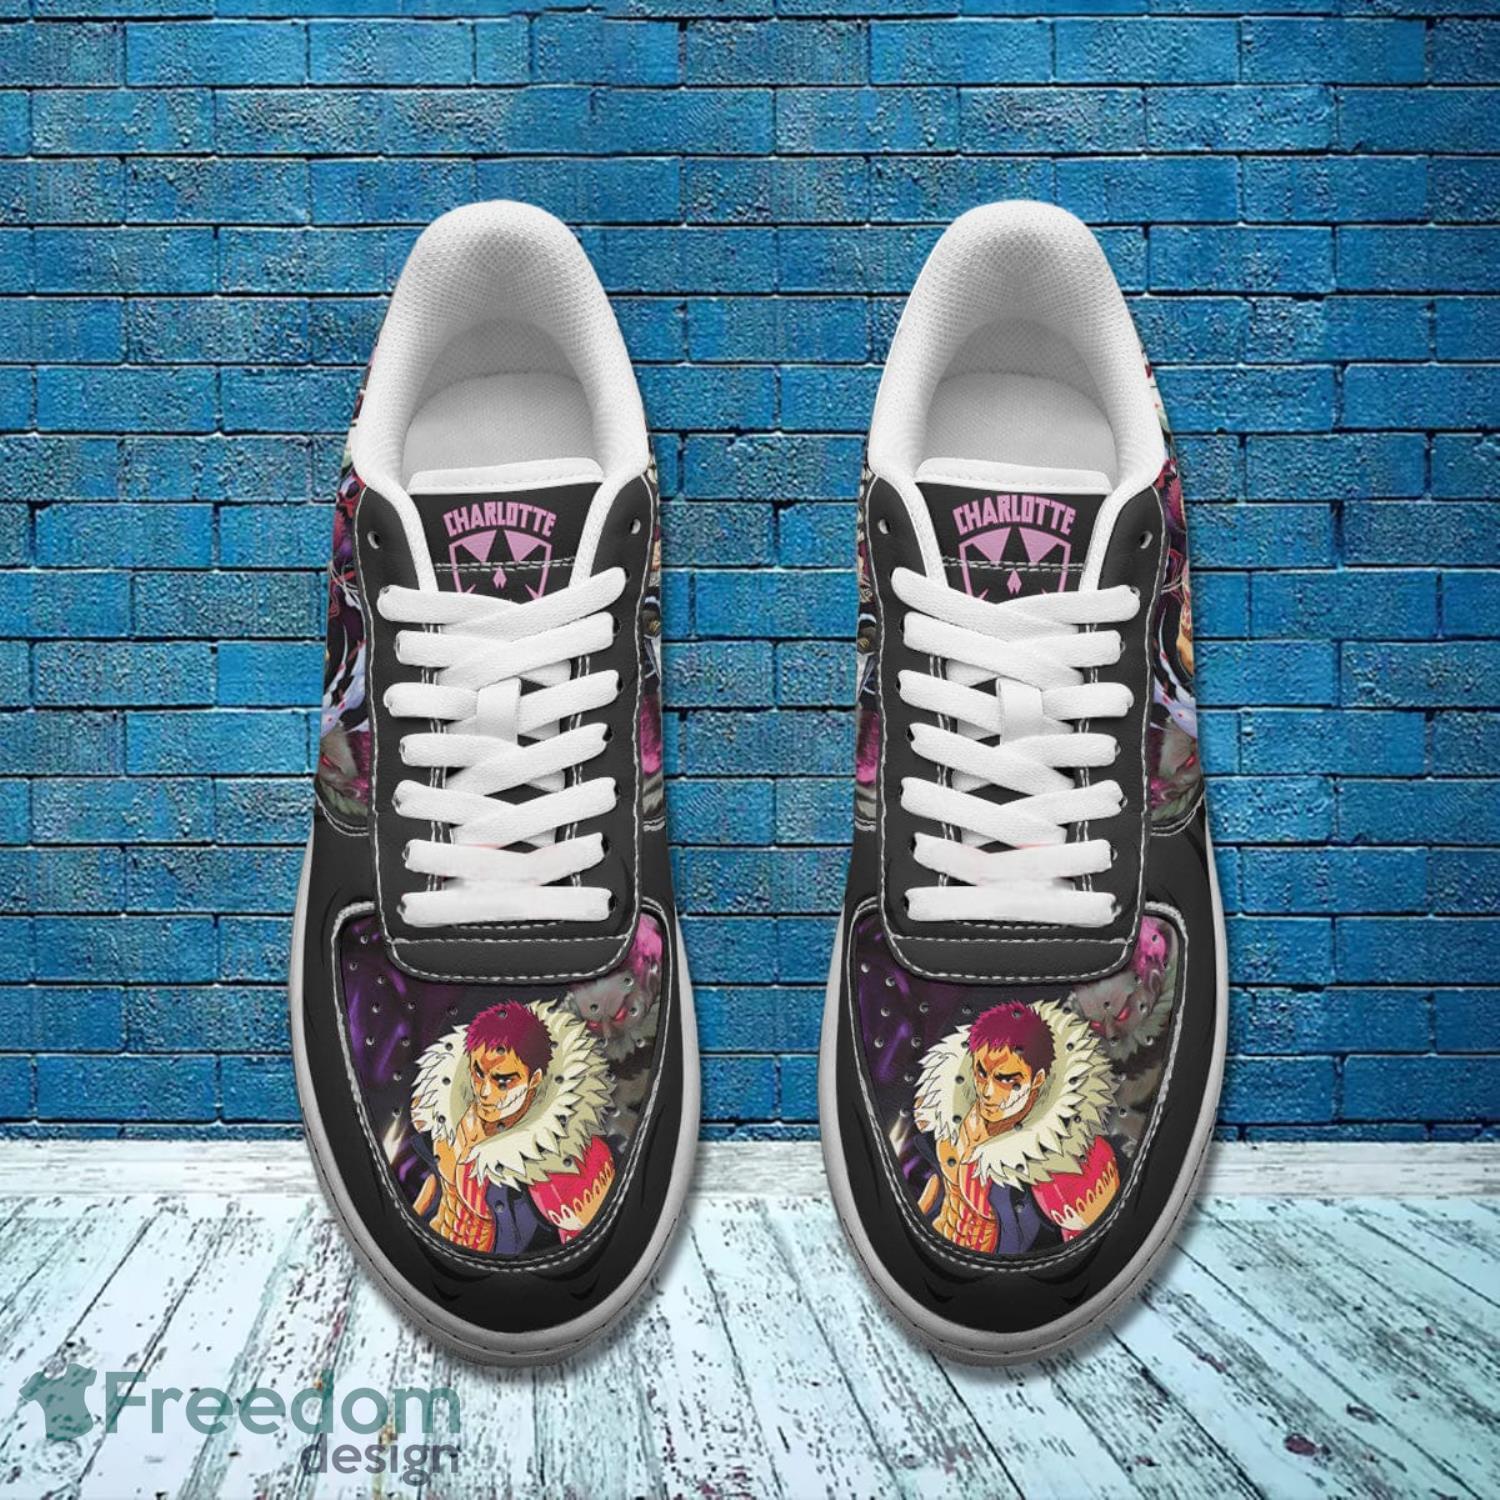 One Piece Charlotte Katakuri Air Force Shoes Gift For Anime's Fans